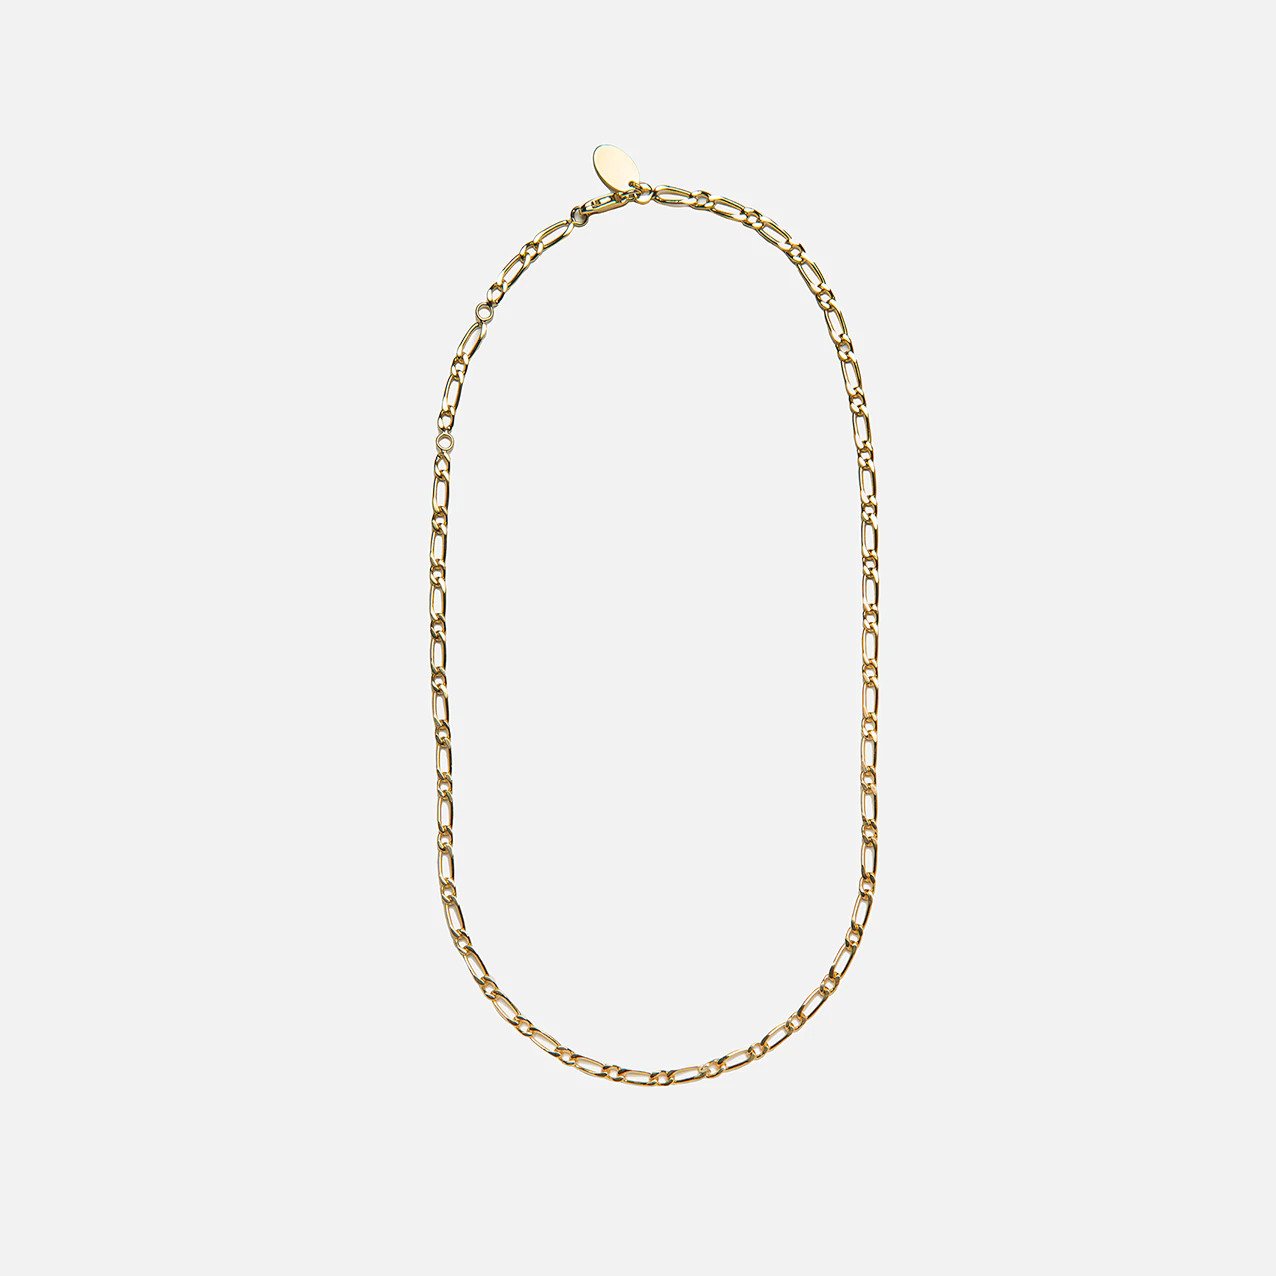 Fancy Curb Chain Necklace